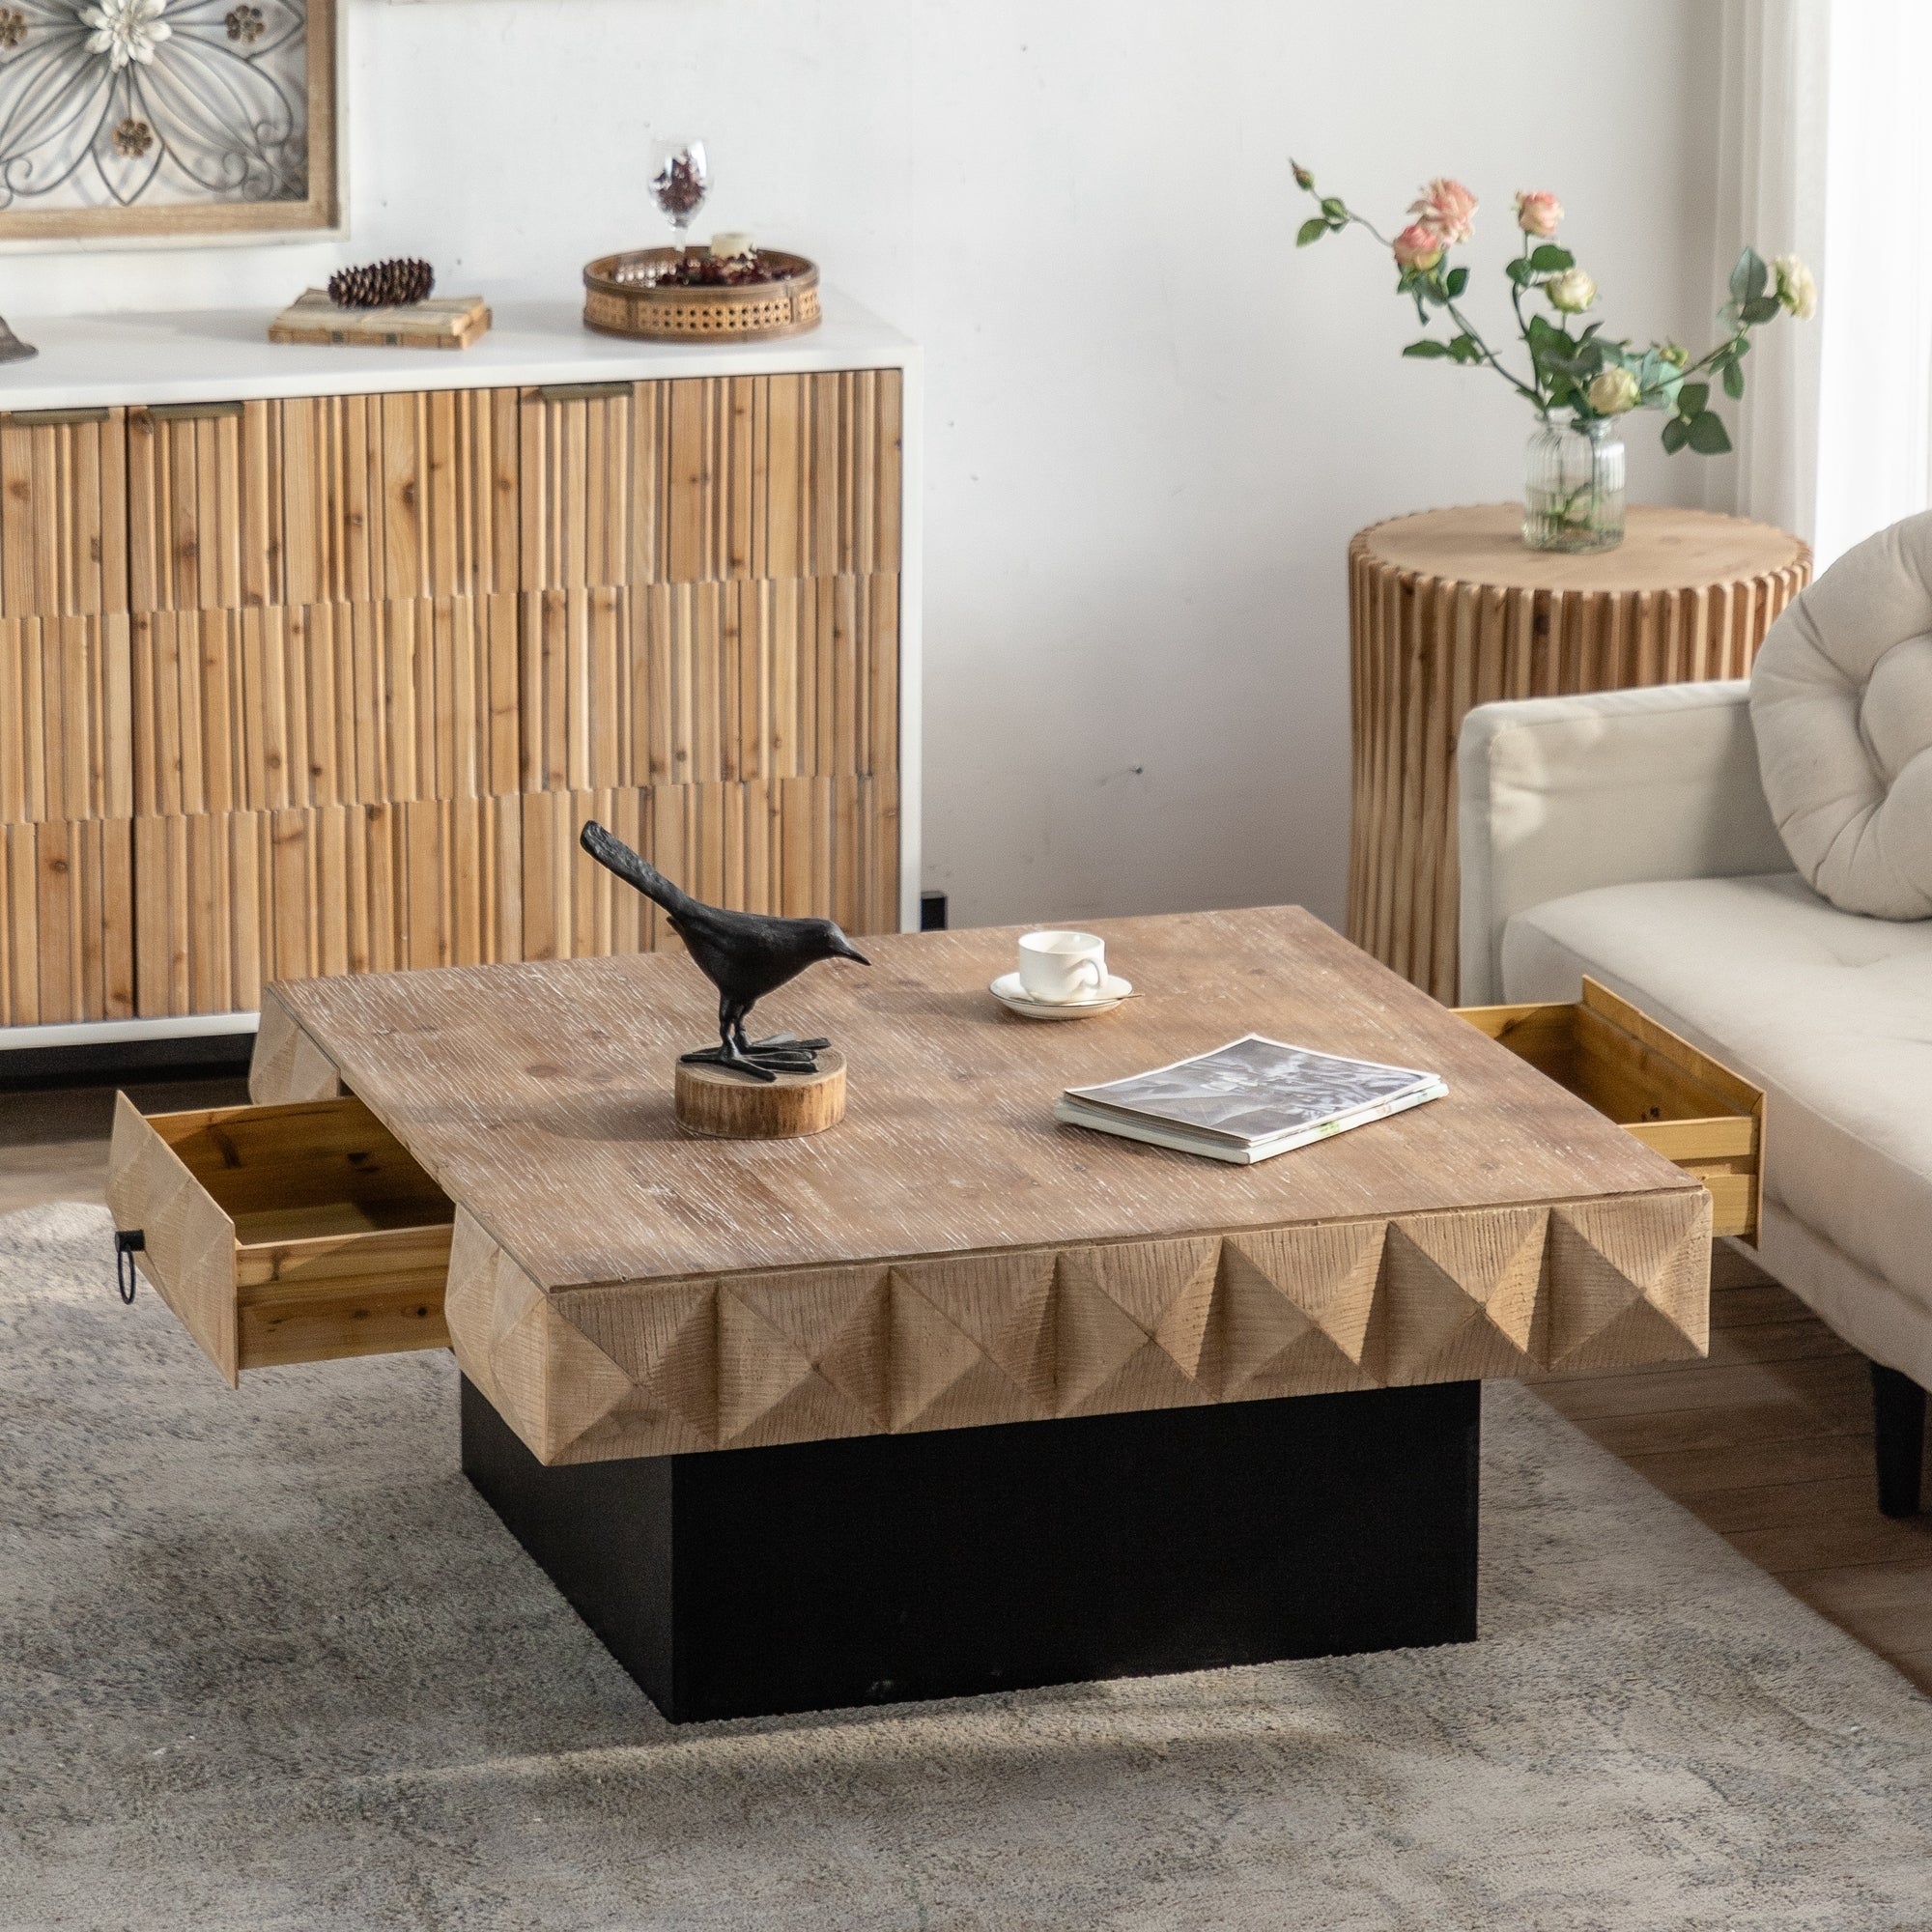 Three-dimensional Embossed Pattern Square Retro Coffee Table - Natural